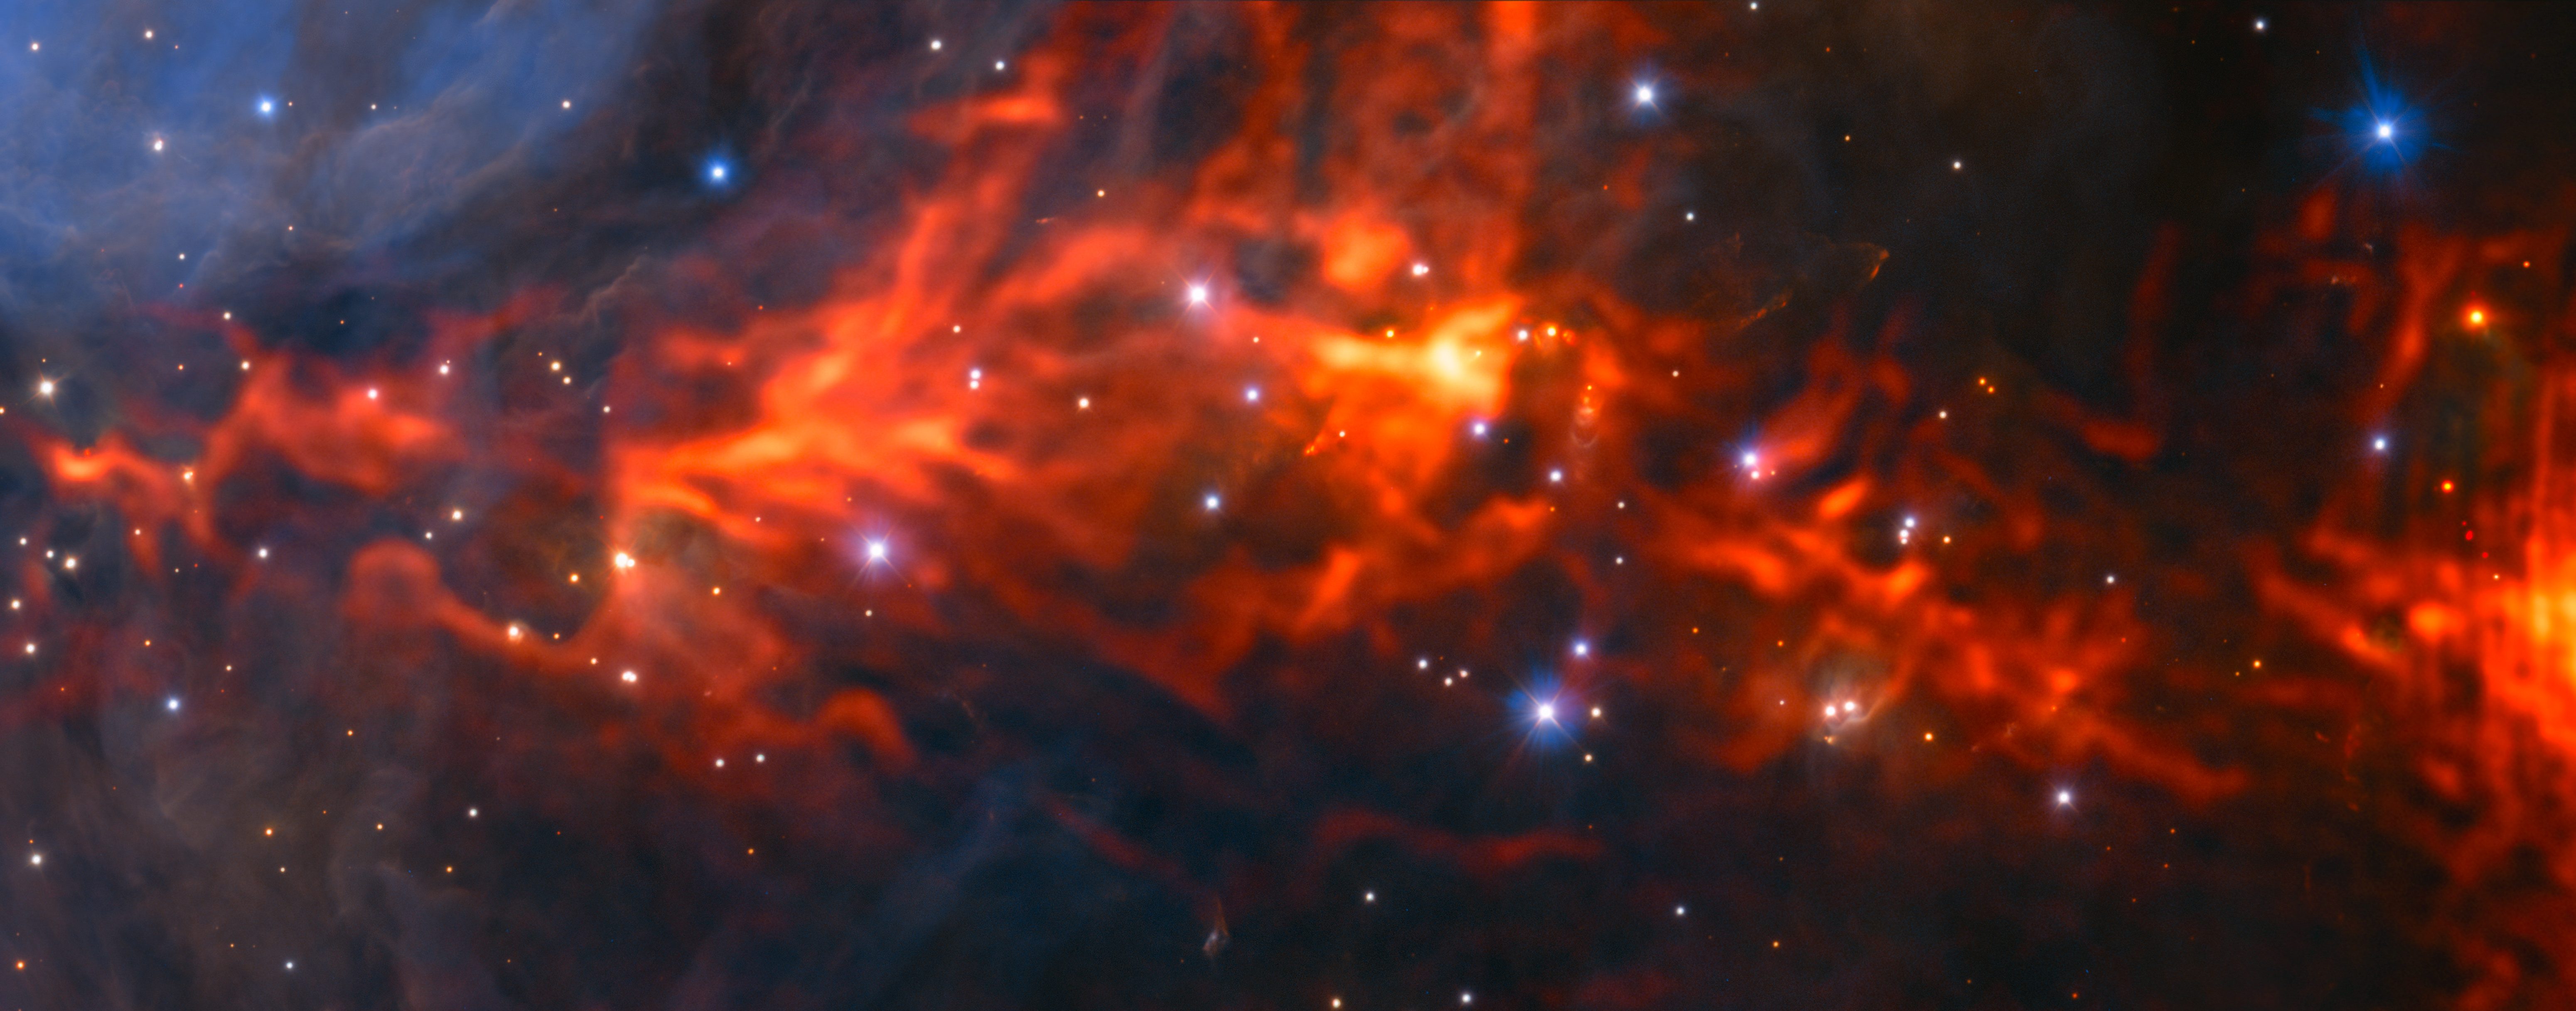 This spectacular and unusual image shows part of the famous Orion Nebula, a star formation region lying about 1350 light-years from Earth. It combines a mosaic of millimetre wavelength images from the Atacama Large Millimeter/submillimeter Array (ALMA) and the IRAM 30-metre telescope, shown in red, with a more familiar infrared view from the HAWK-I instrument on ESO’s Very Large Telescope shown in blue. The group of bright blue-white stars at the left is the Trapezium Cluster, hot young stars that are only a few million years old.